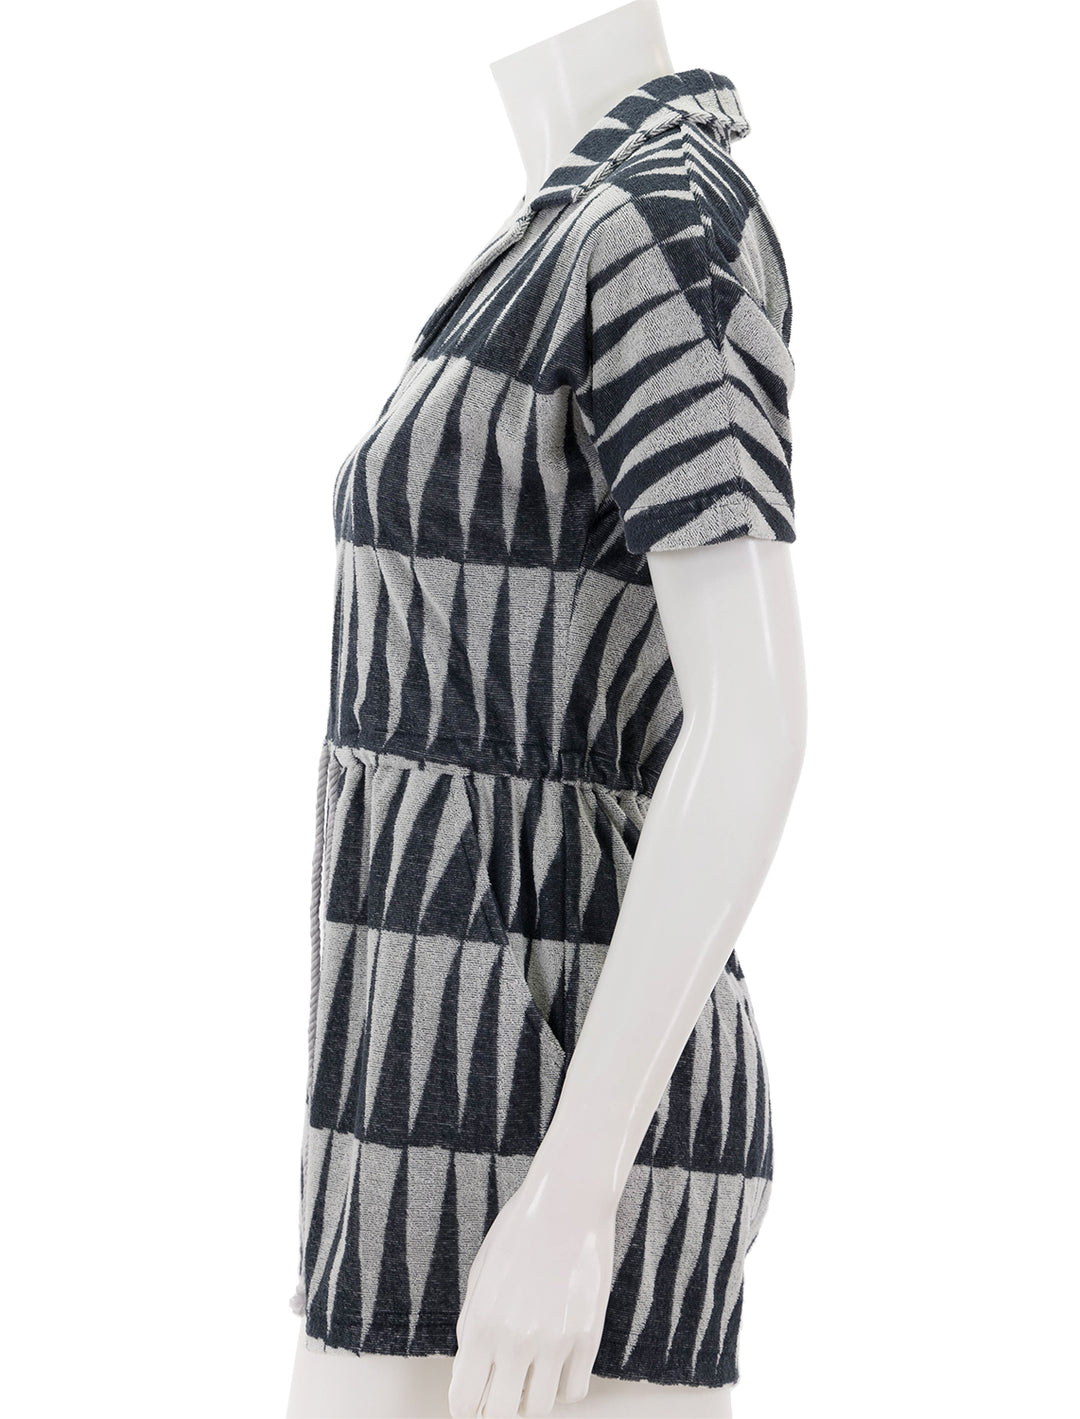 Side view of Marine Layer's terry out romper in black and white geo triangle.